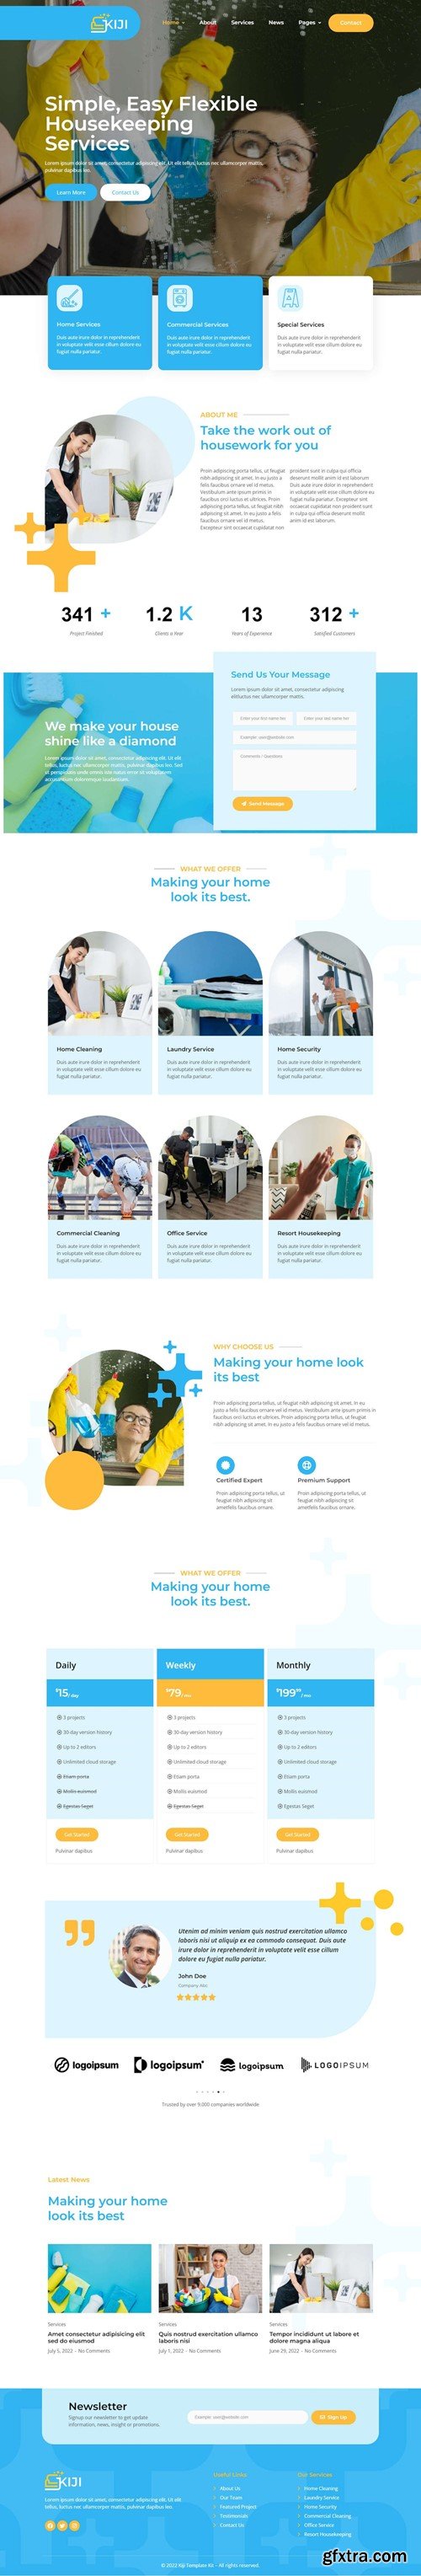 Kiji - Houskeeping & Cleaning Services Elementor Template Kit ZV6T5MH